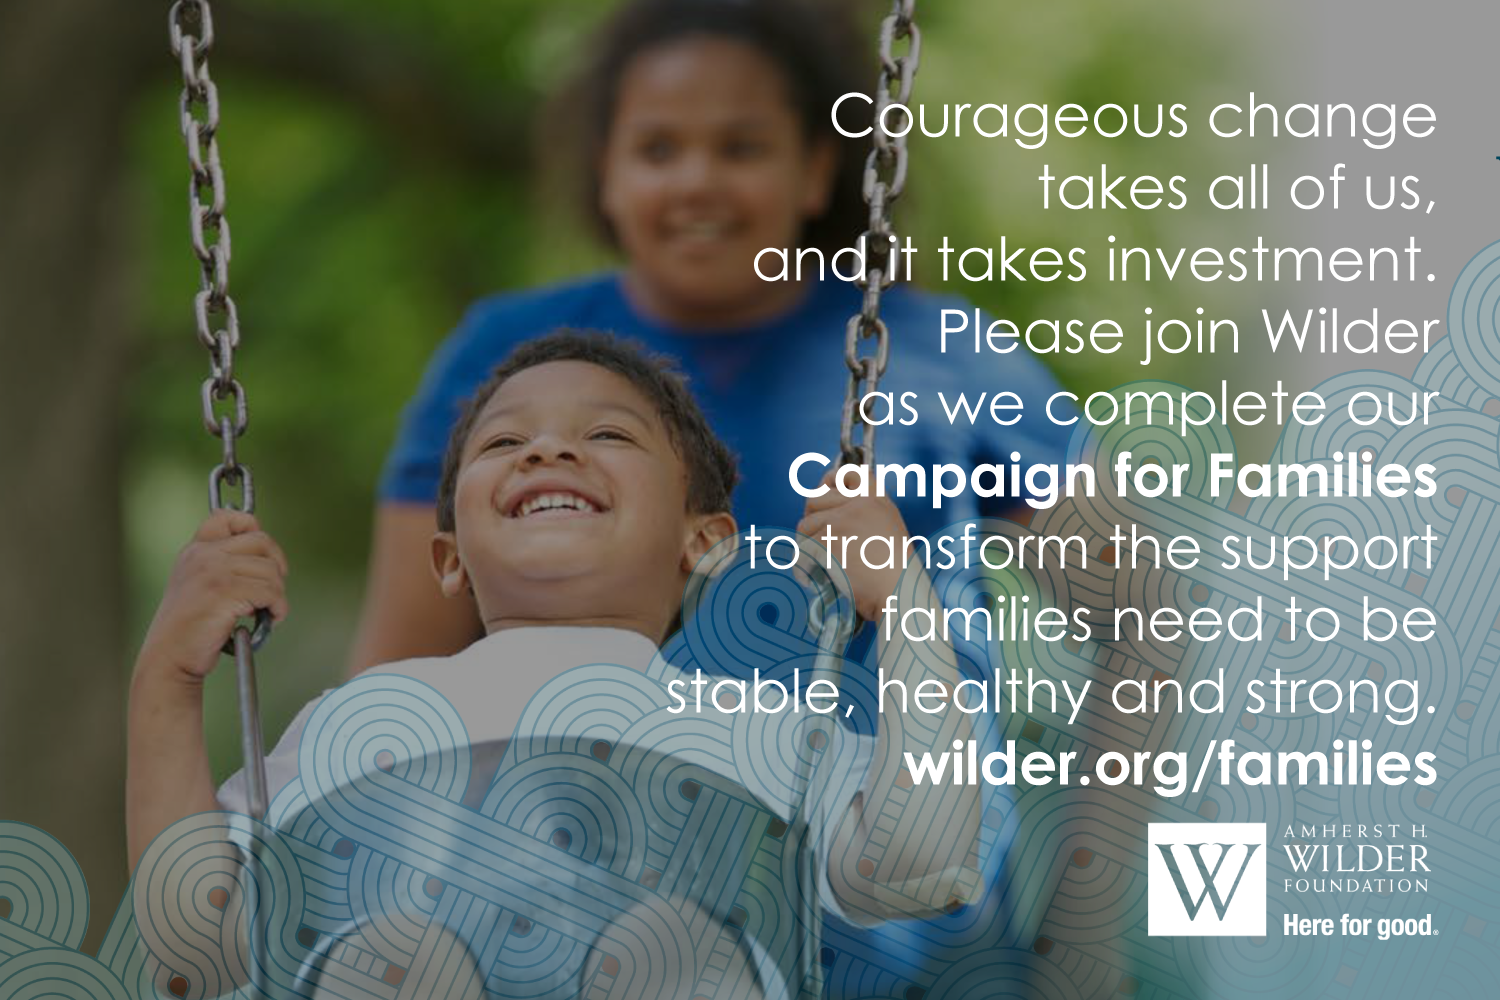 Wilder's Campaign for Families